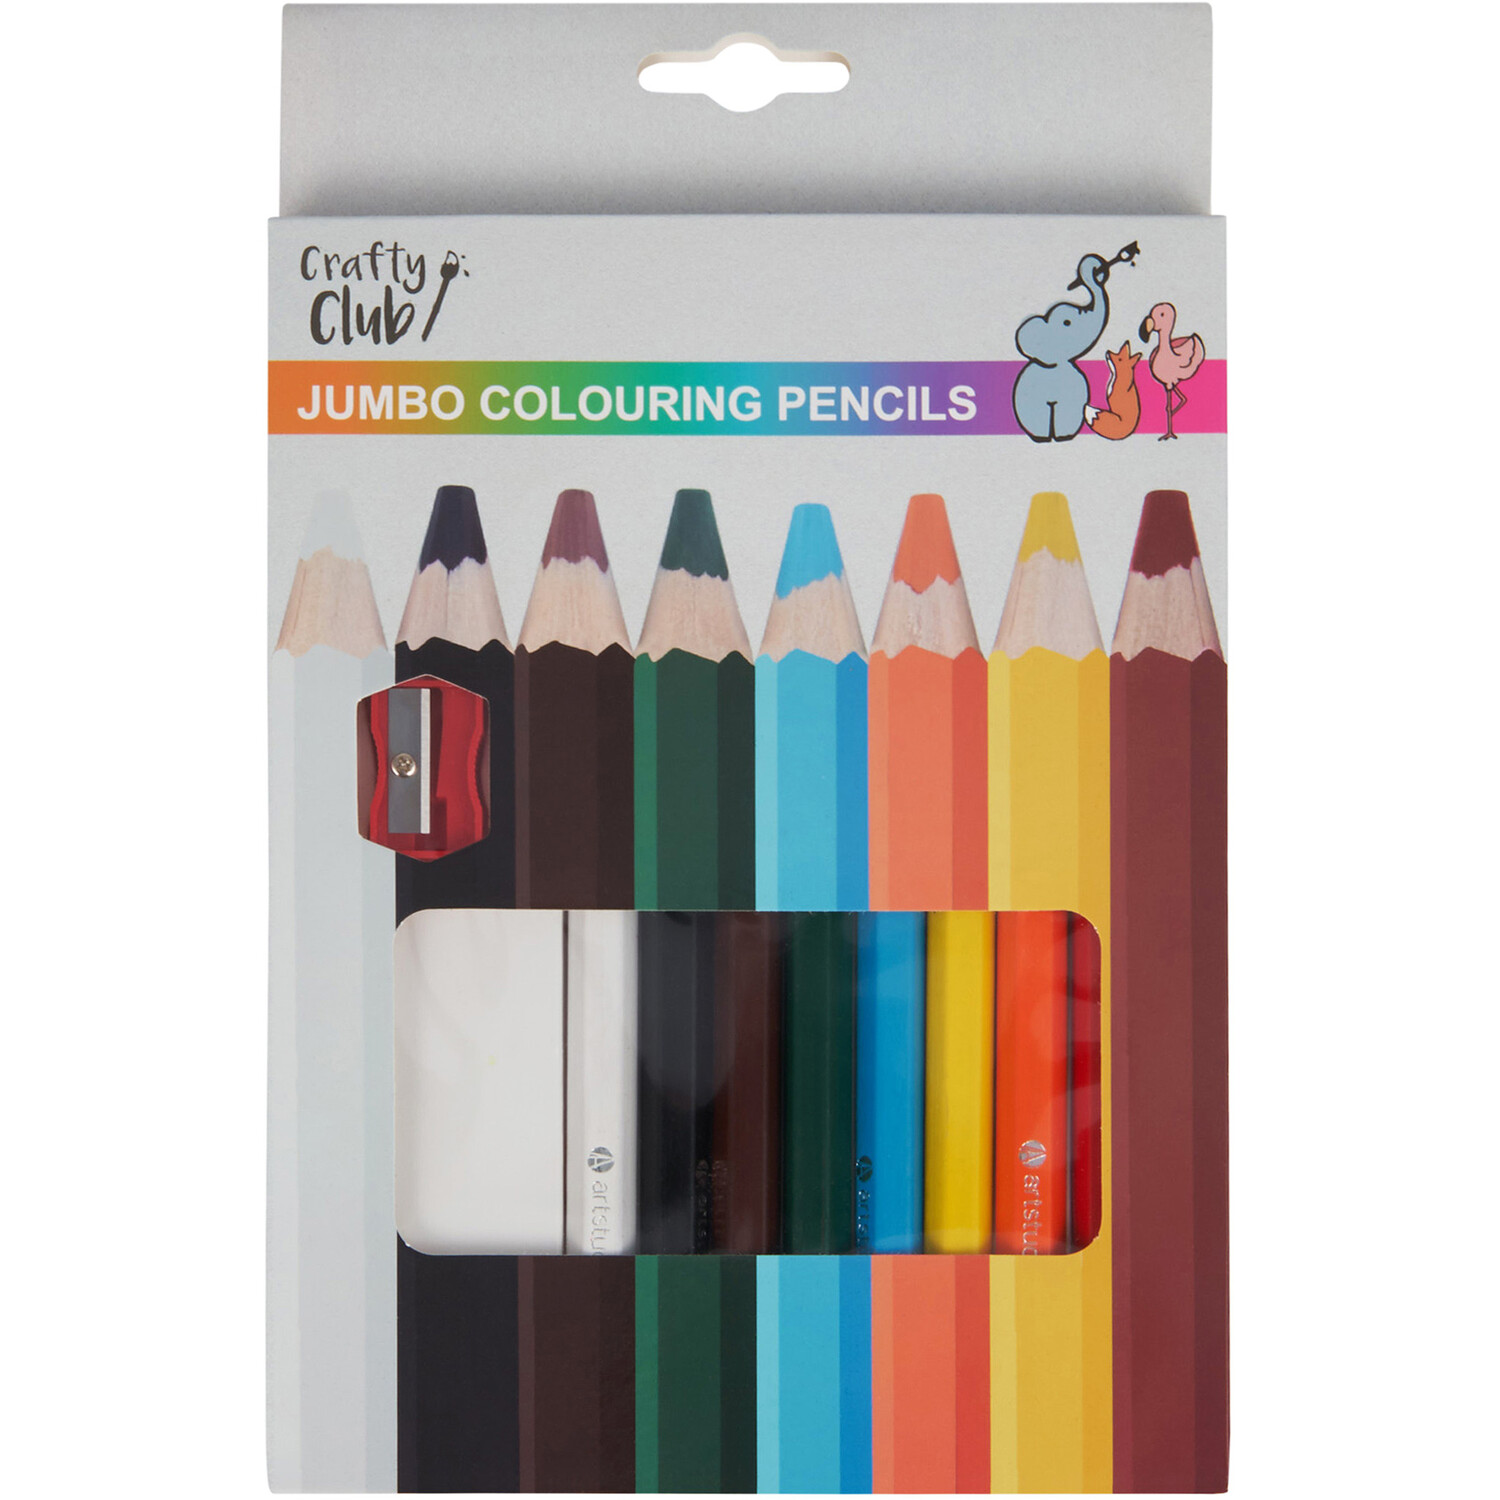 Crafty Club Jumbo Colouring Pencil 8 Pack Image 1